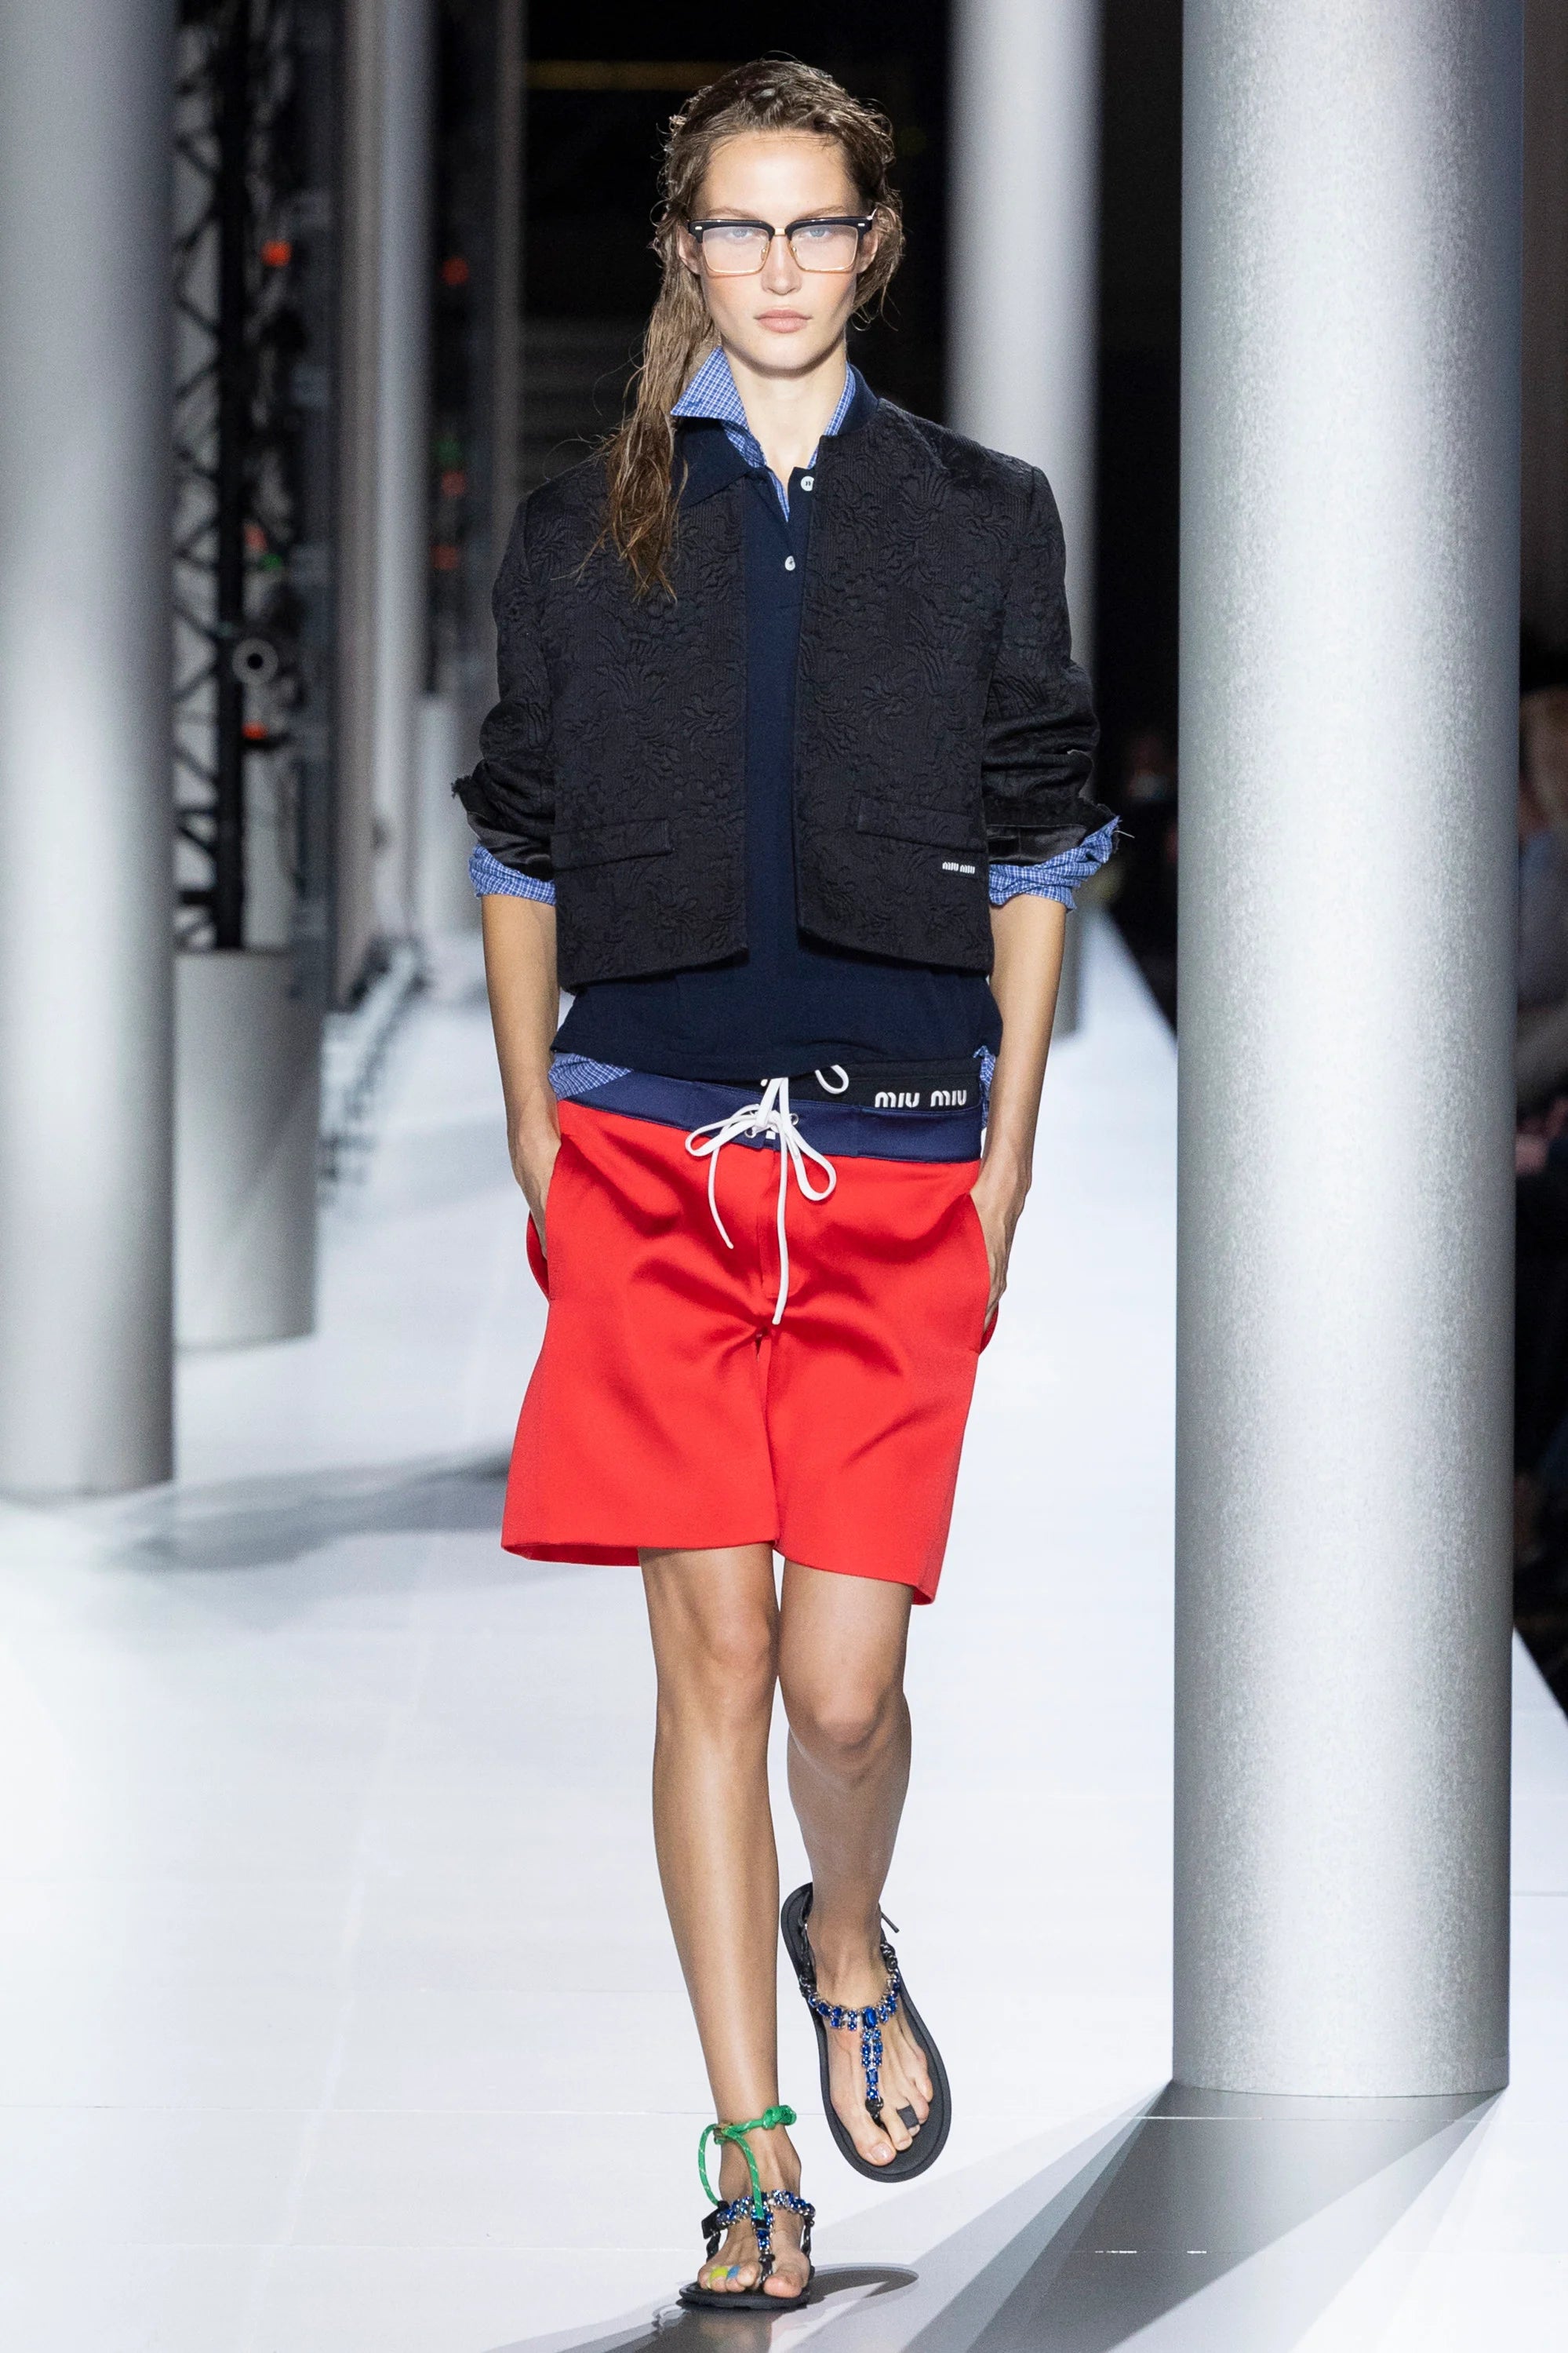 Miu-Miu SS24 collection model wearing flipflops, red shorts and layered top